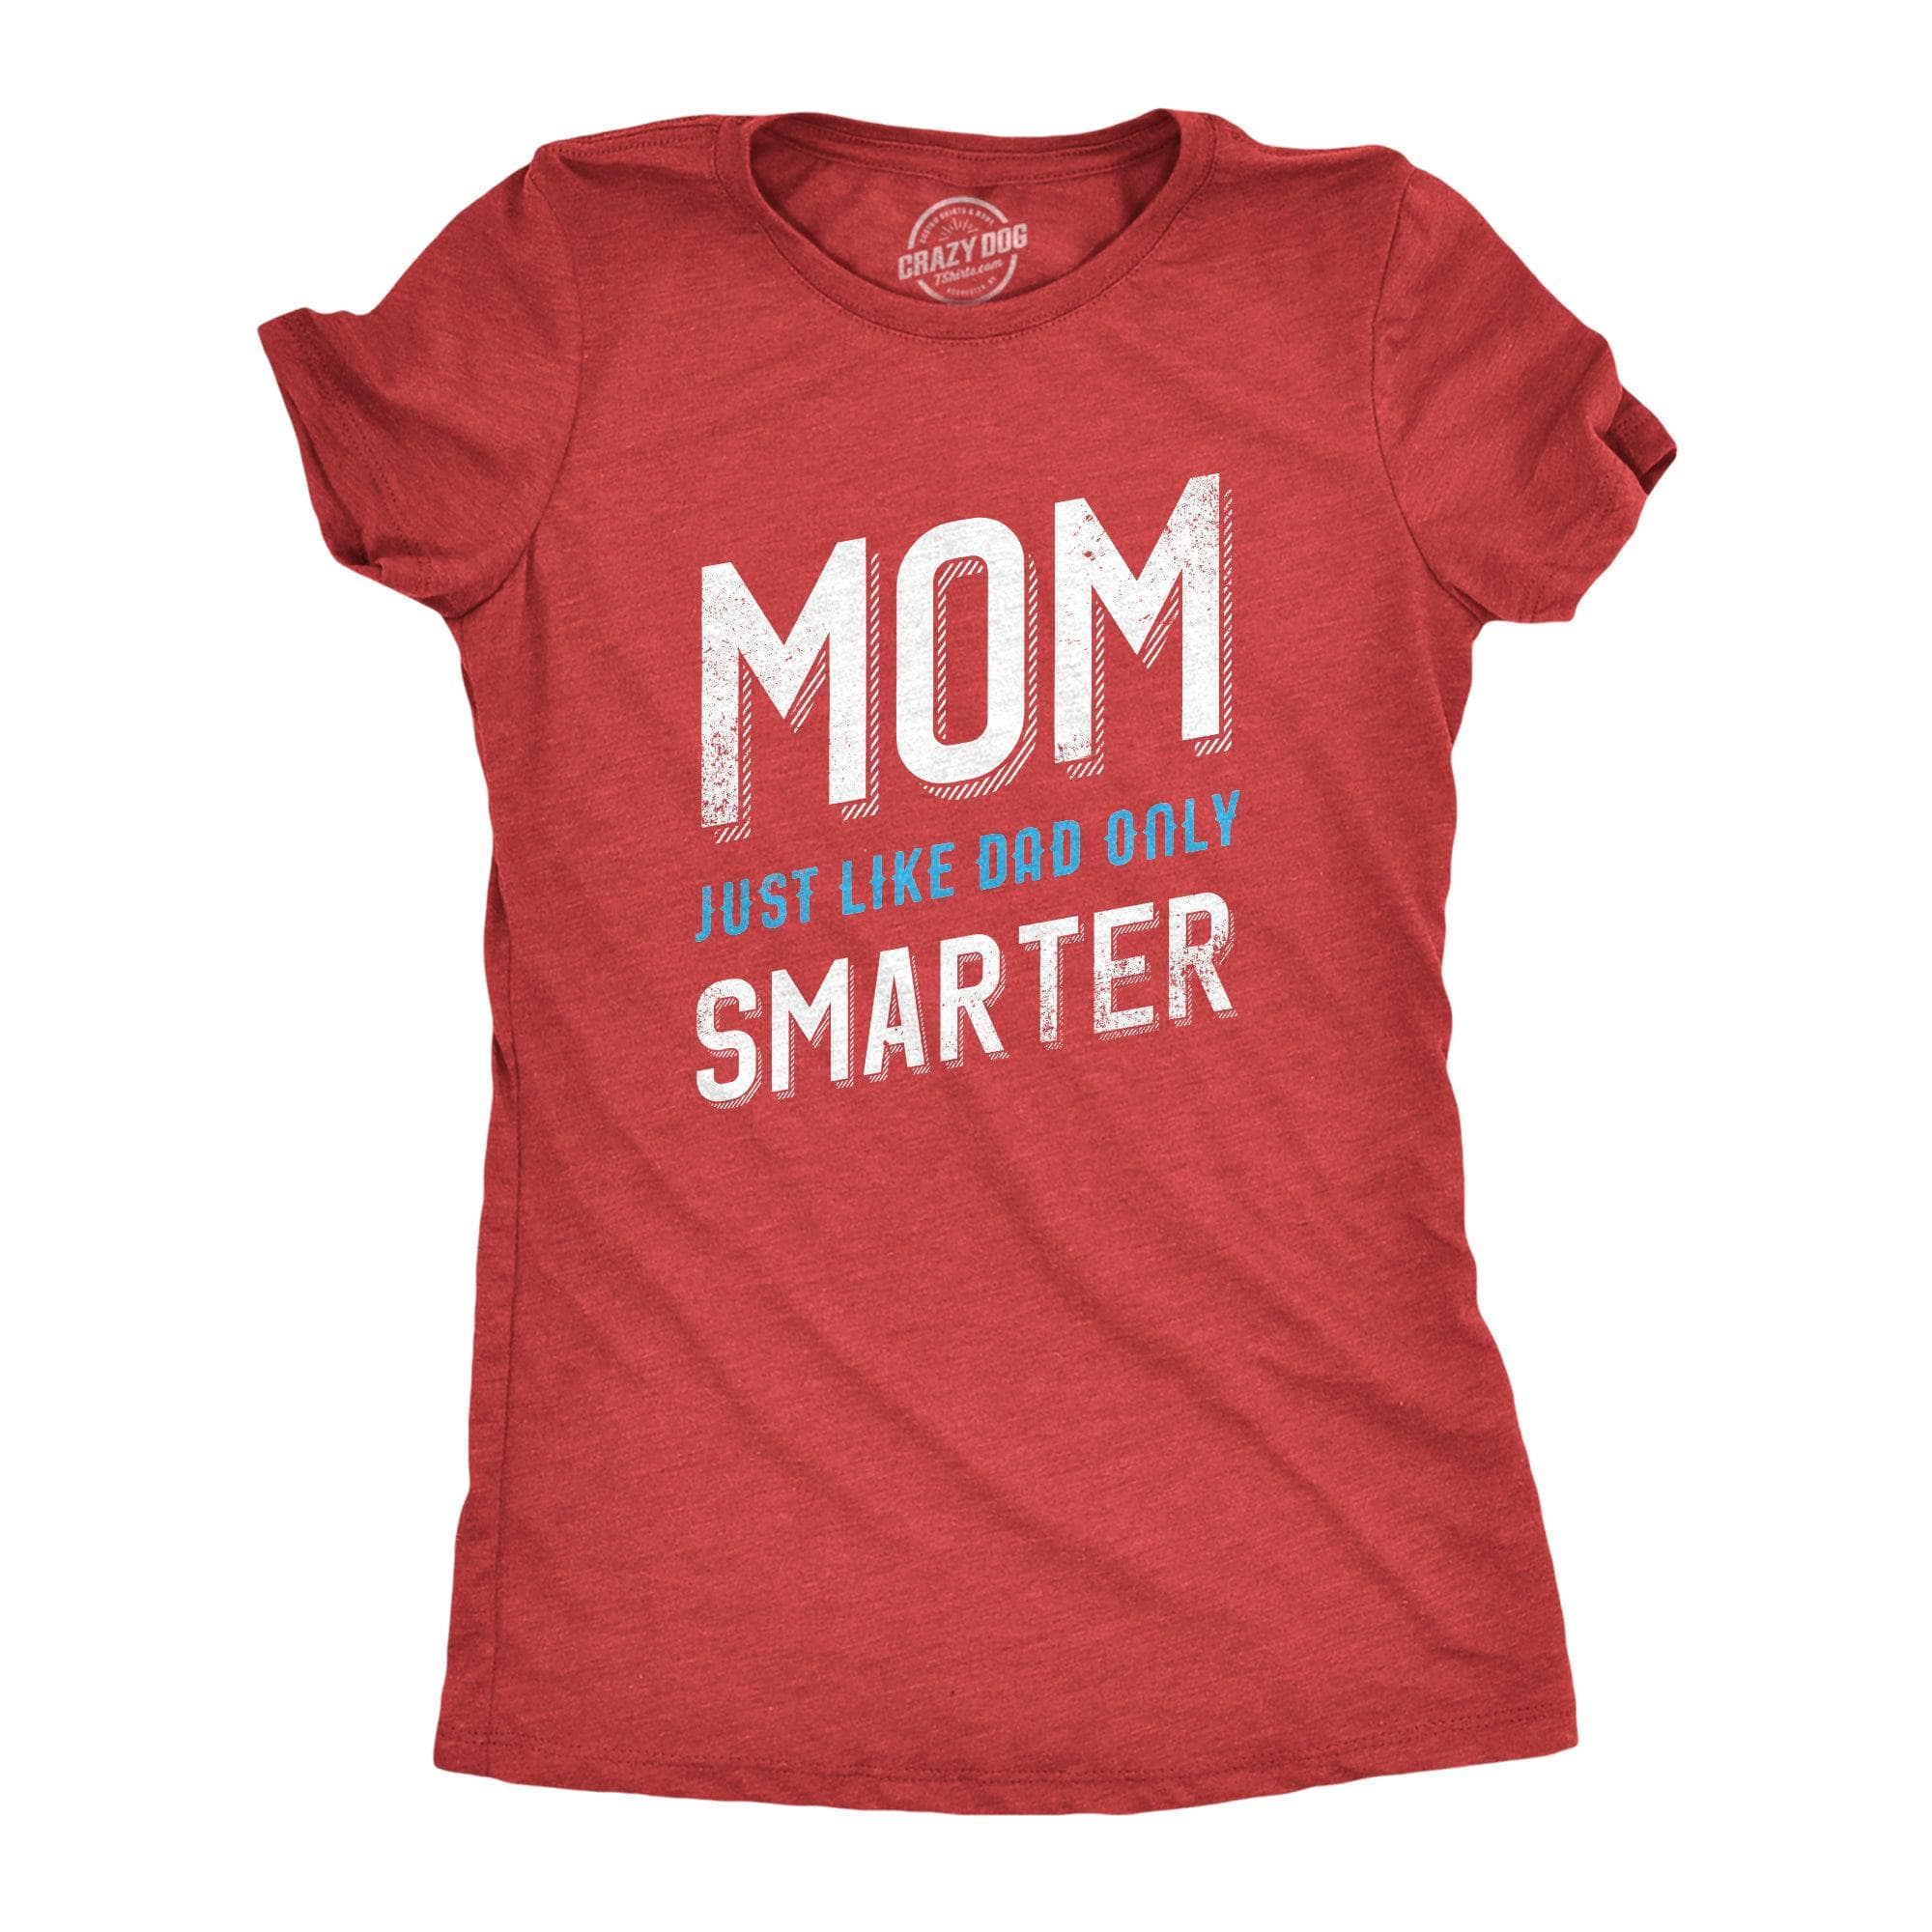 Mom Just Like My Dad But Smarter Women's Tshirt  -  Crazy Dog T-Shirts